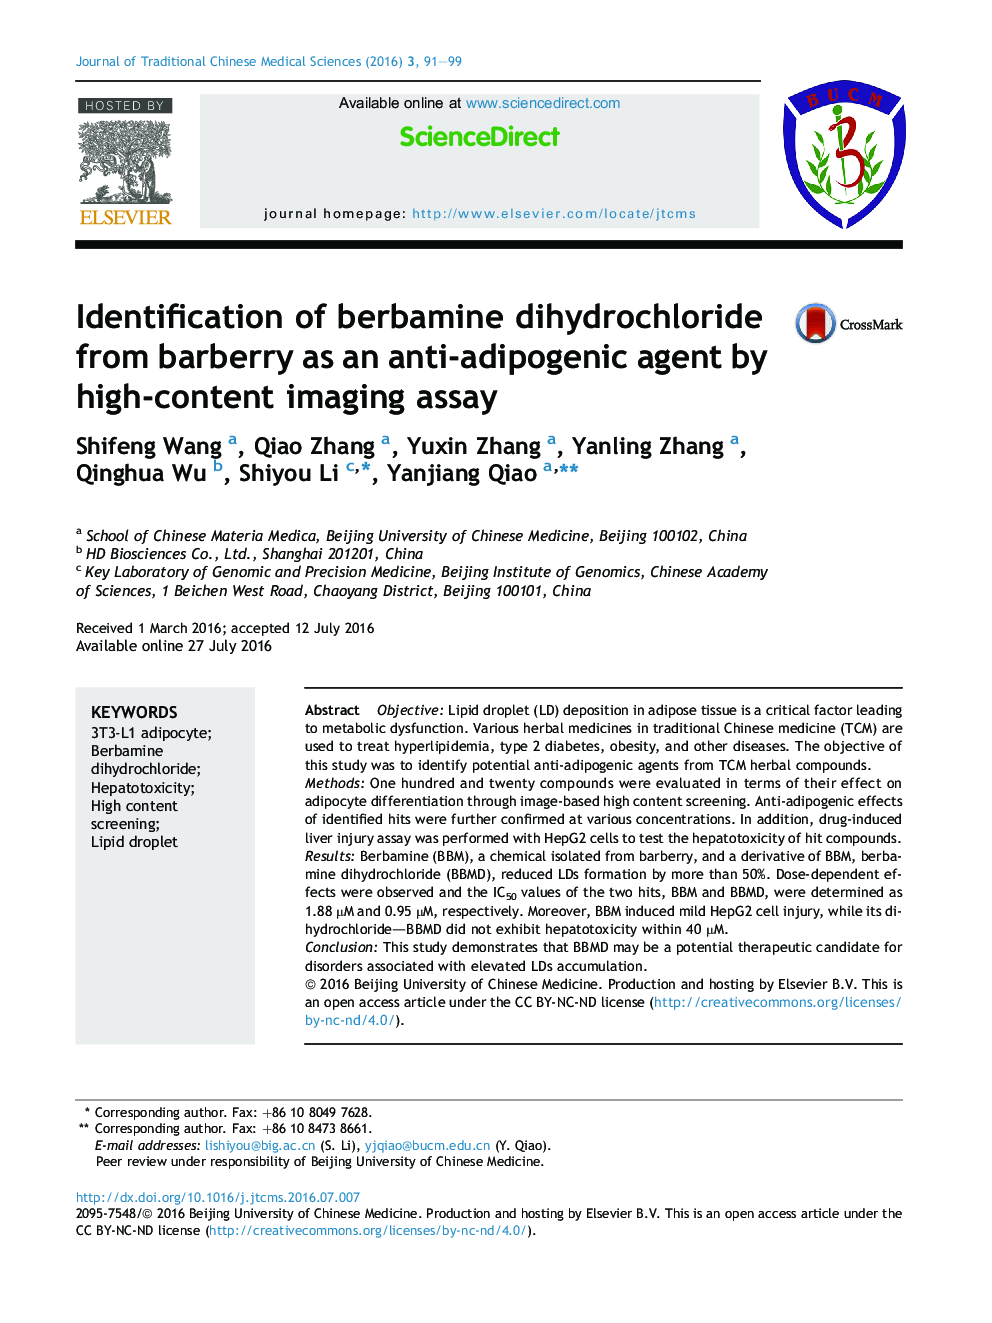 Identification of berbamine dihydrochloride from barberry as an anti-adipogenic agent by high-content imaging assay 